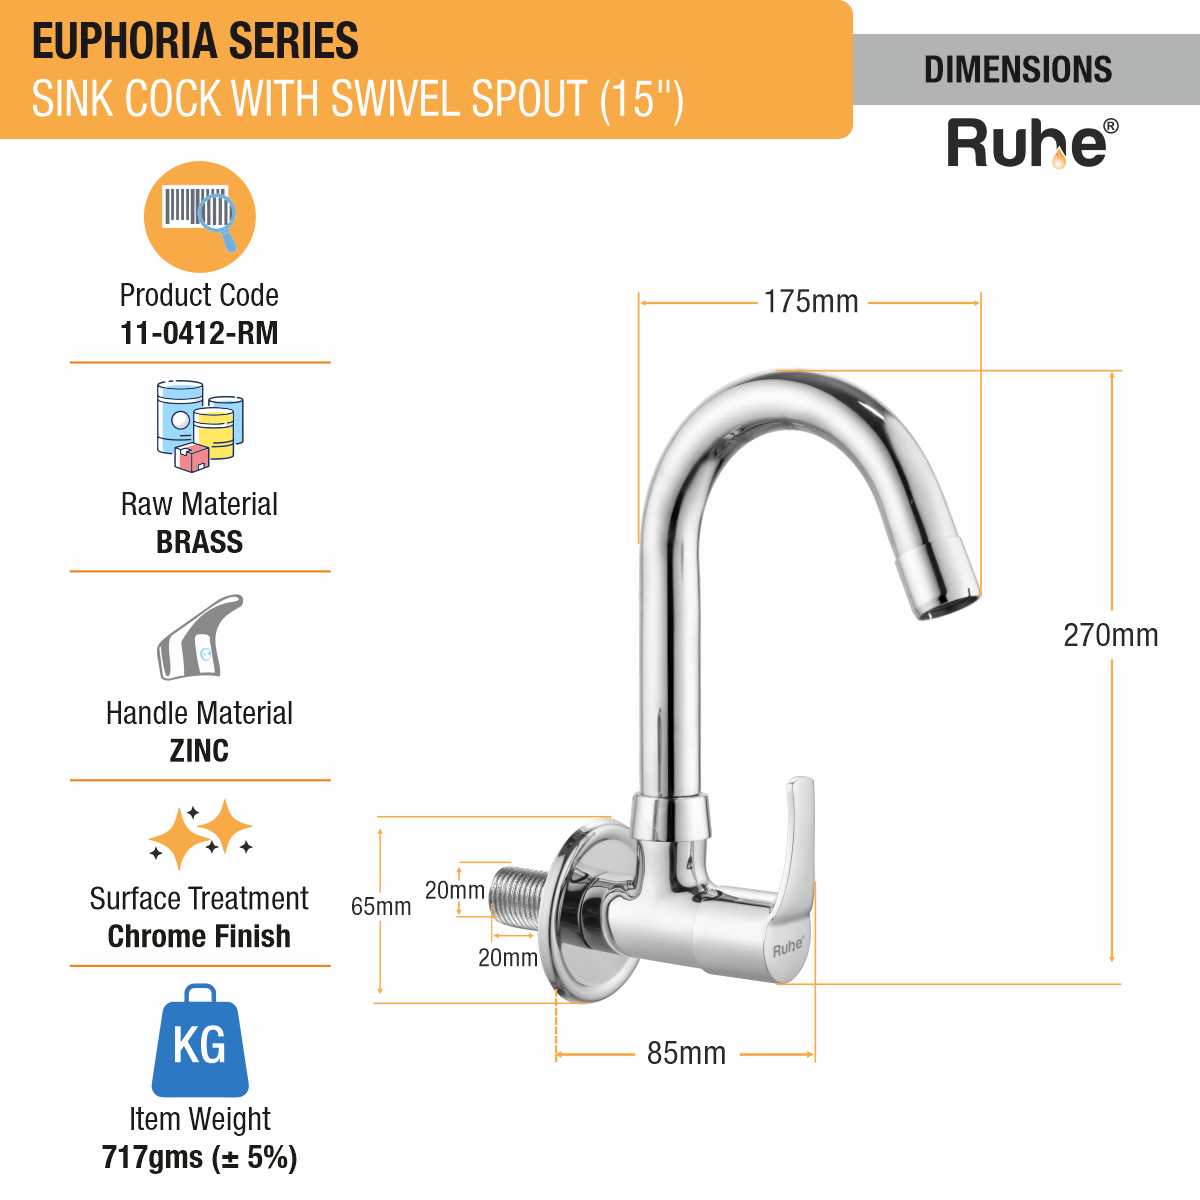 Euphoria Sink Tap with Medium (15 inches) Round Swivel Spout Faucet dimensions and size